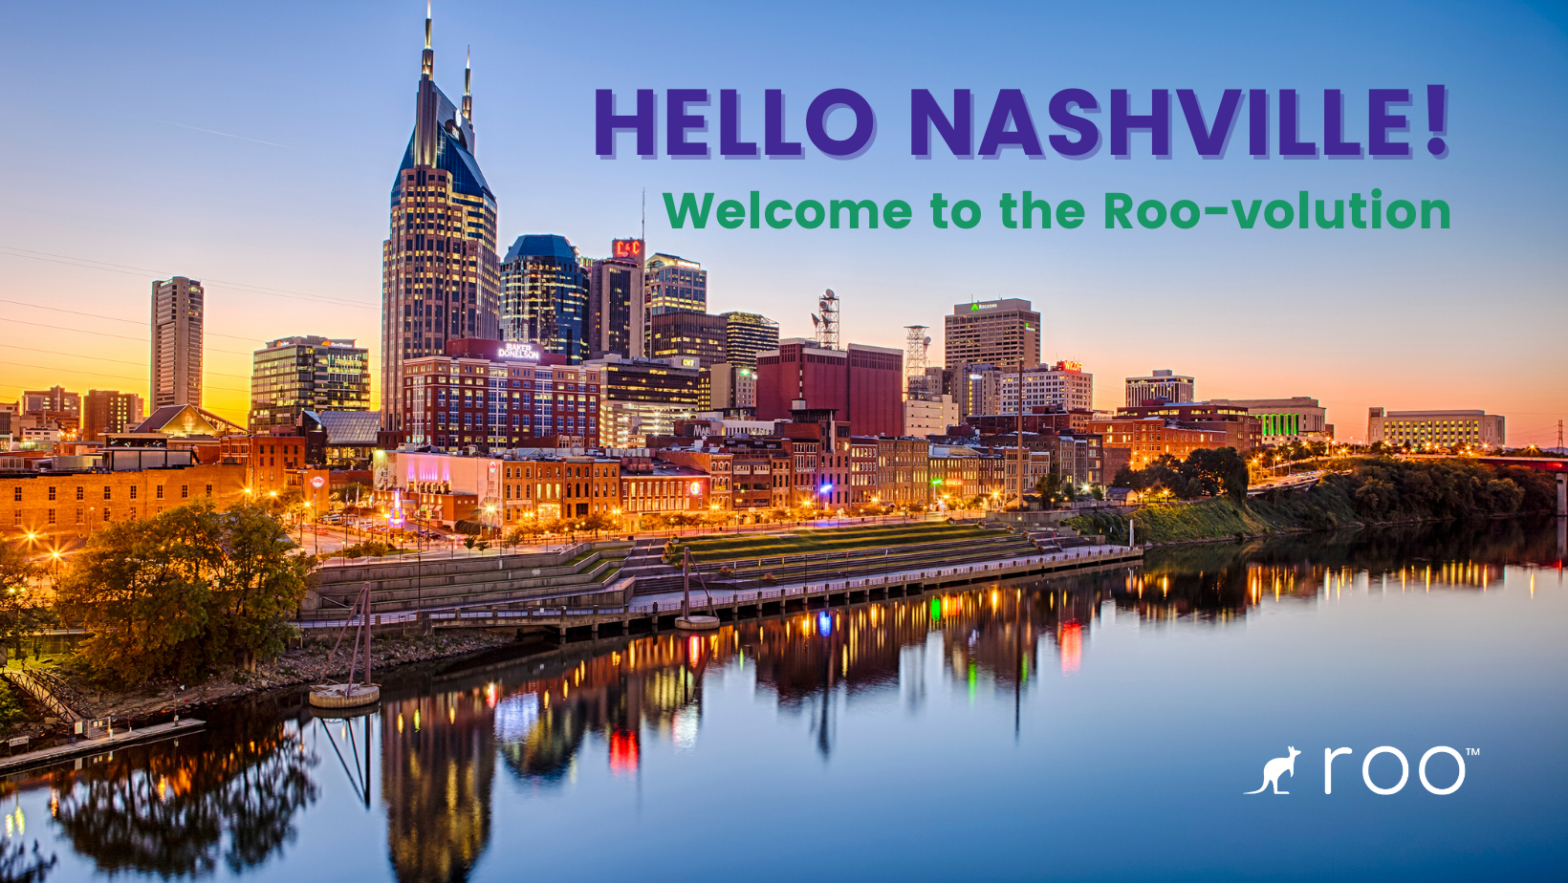 Roo's now in Nashville for relief veterinarians and veterinary technicians - join us at Fetch Nashville